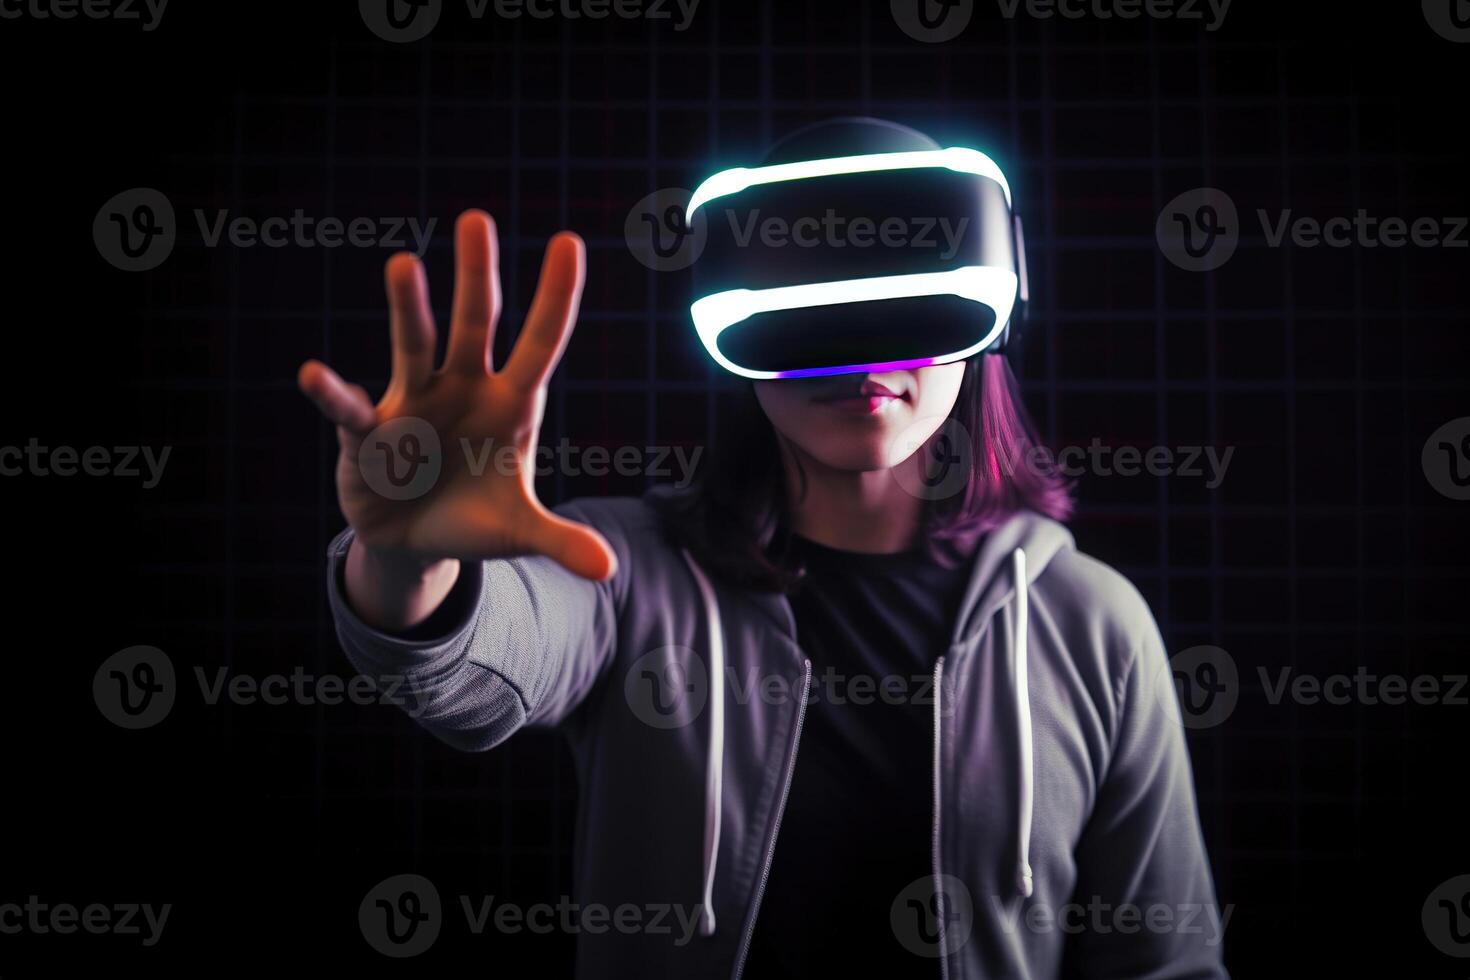 https://static.vecteezy.com/system/resources/previews/022/864/247/non_2x/a-woman-wearing-a-virtual-reality-headset-touching-the-virtual-object-on-dark-background-ai-generated-photo.jpg